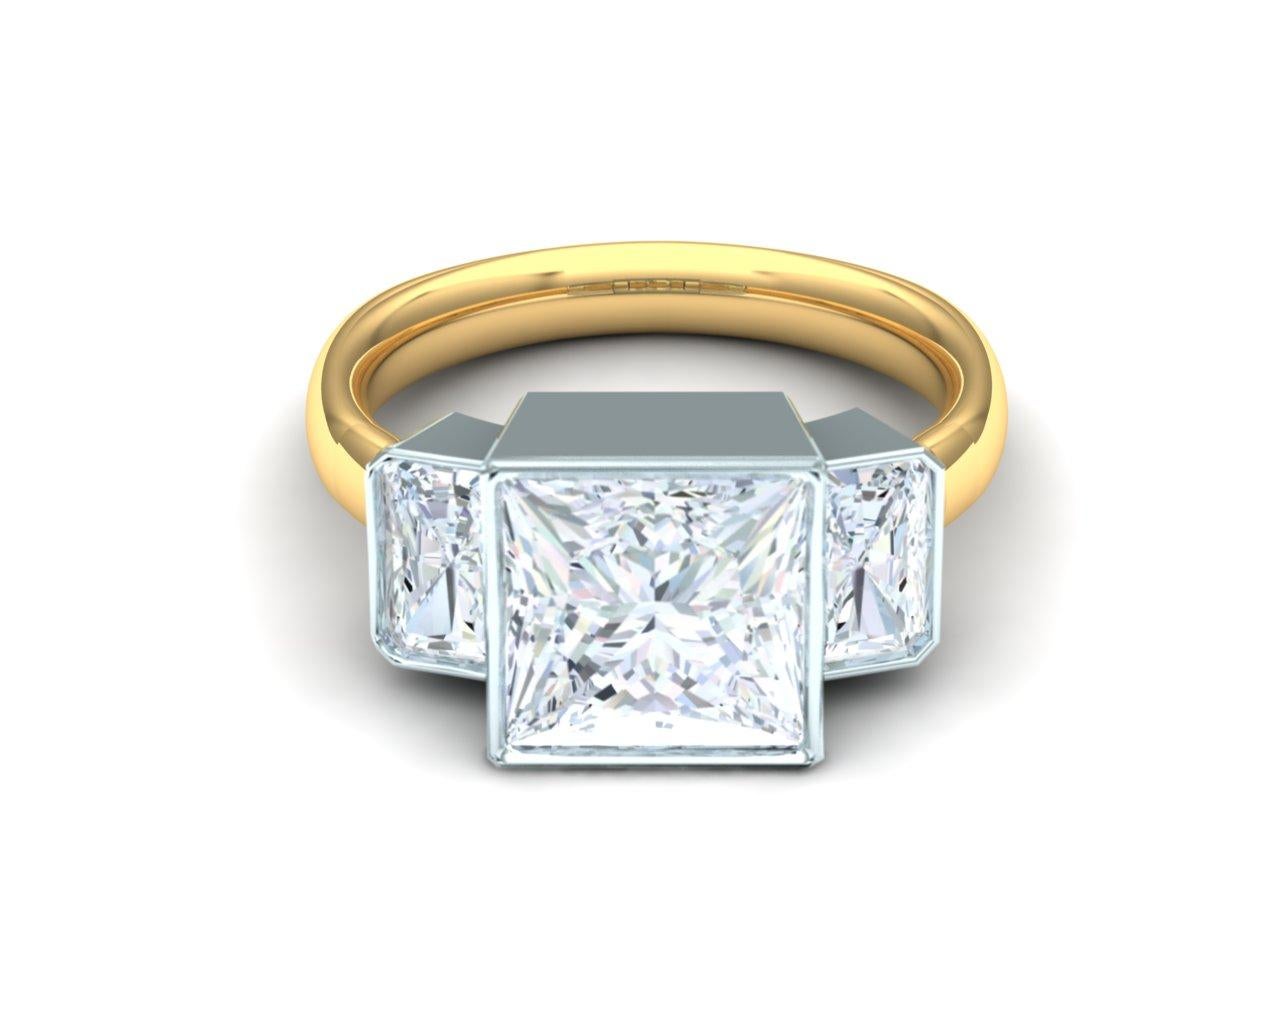 So modern, so clean.  This ring has the simplest of lines which makes this ring a true gem for anyone looking for a ring that says more about their style than just another large diamond ring.  This ring has a gorgeous GIA certified H-SI1 3 carat